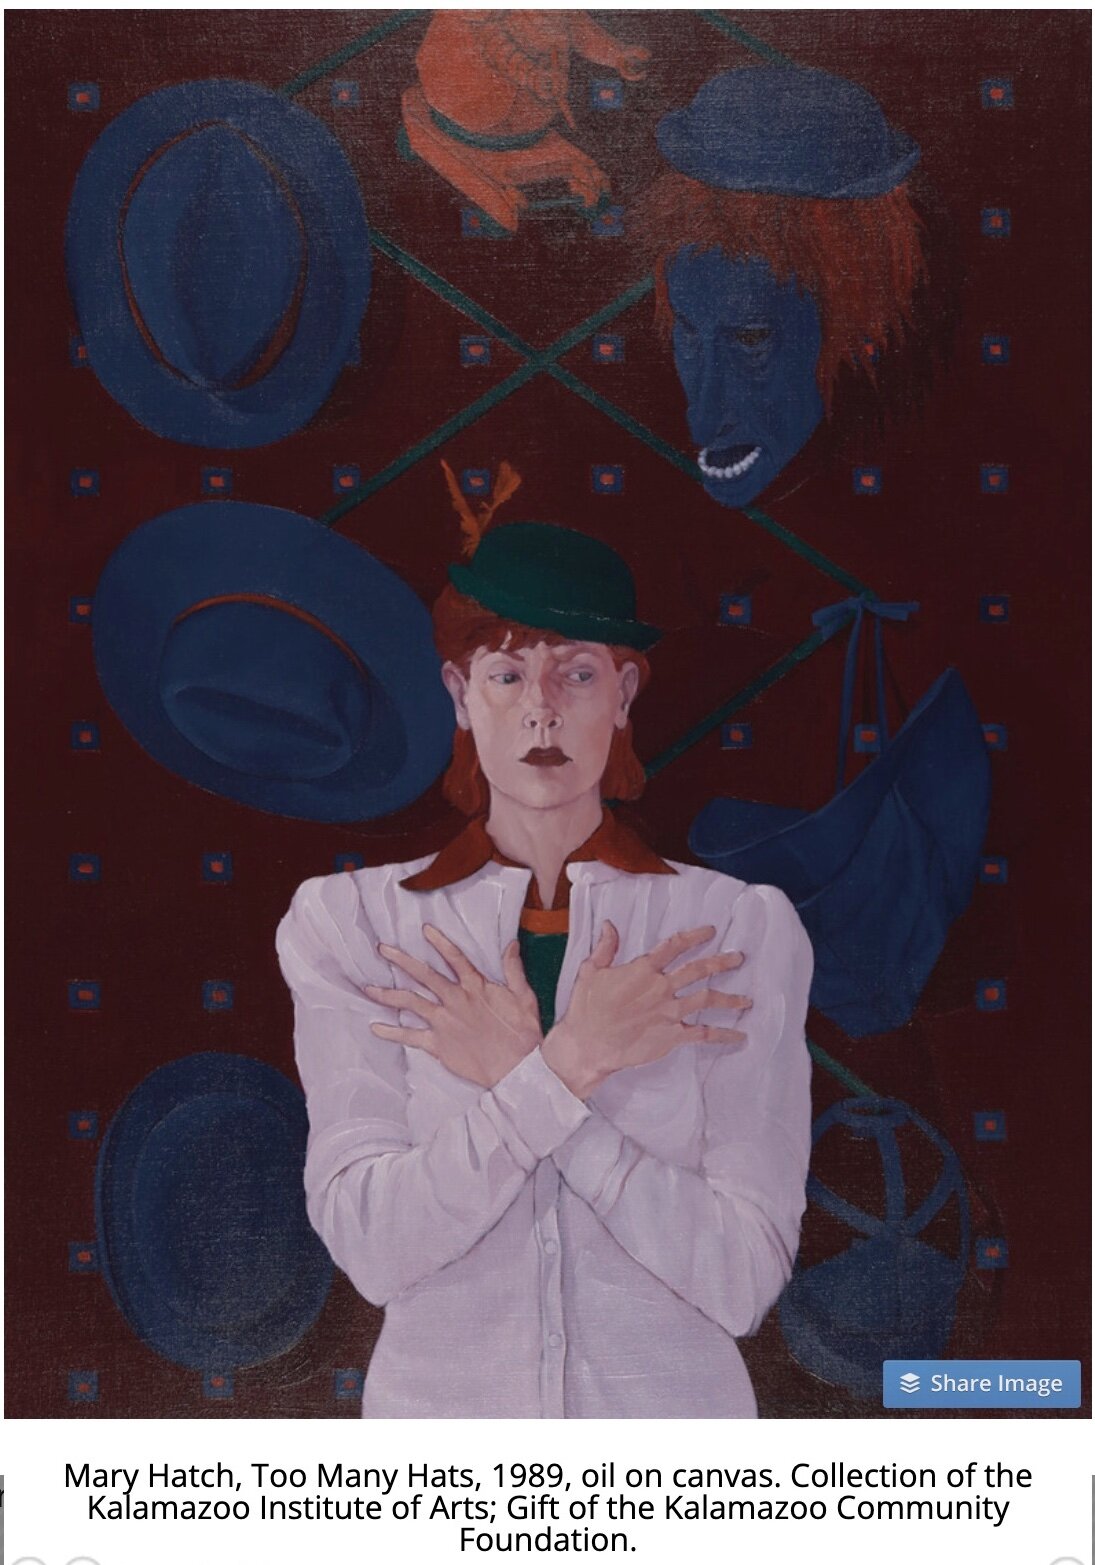 Kalamazoo Institute of Arts galleries will be open during the JumpstART weekend where people can see works like Mary Hatch's painting "Too Many Hats.".